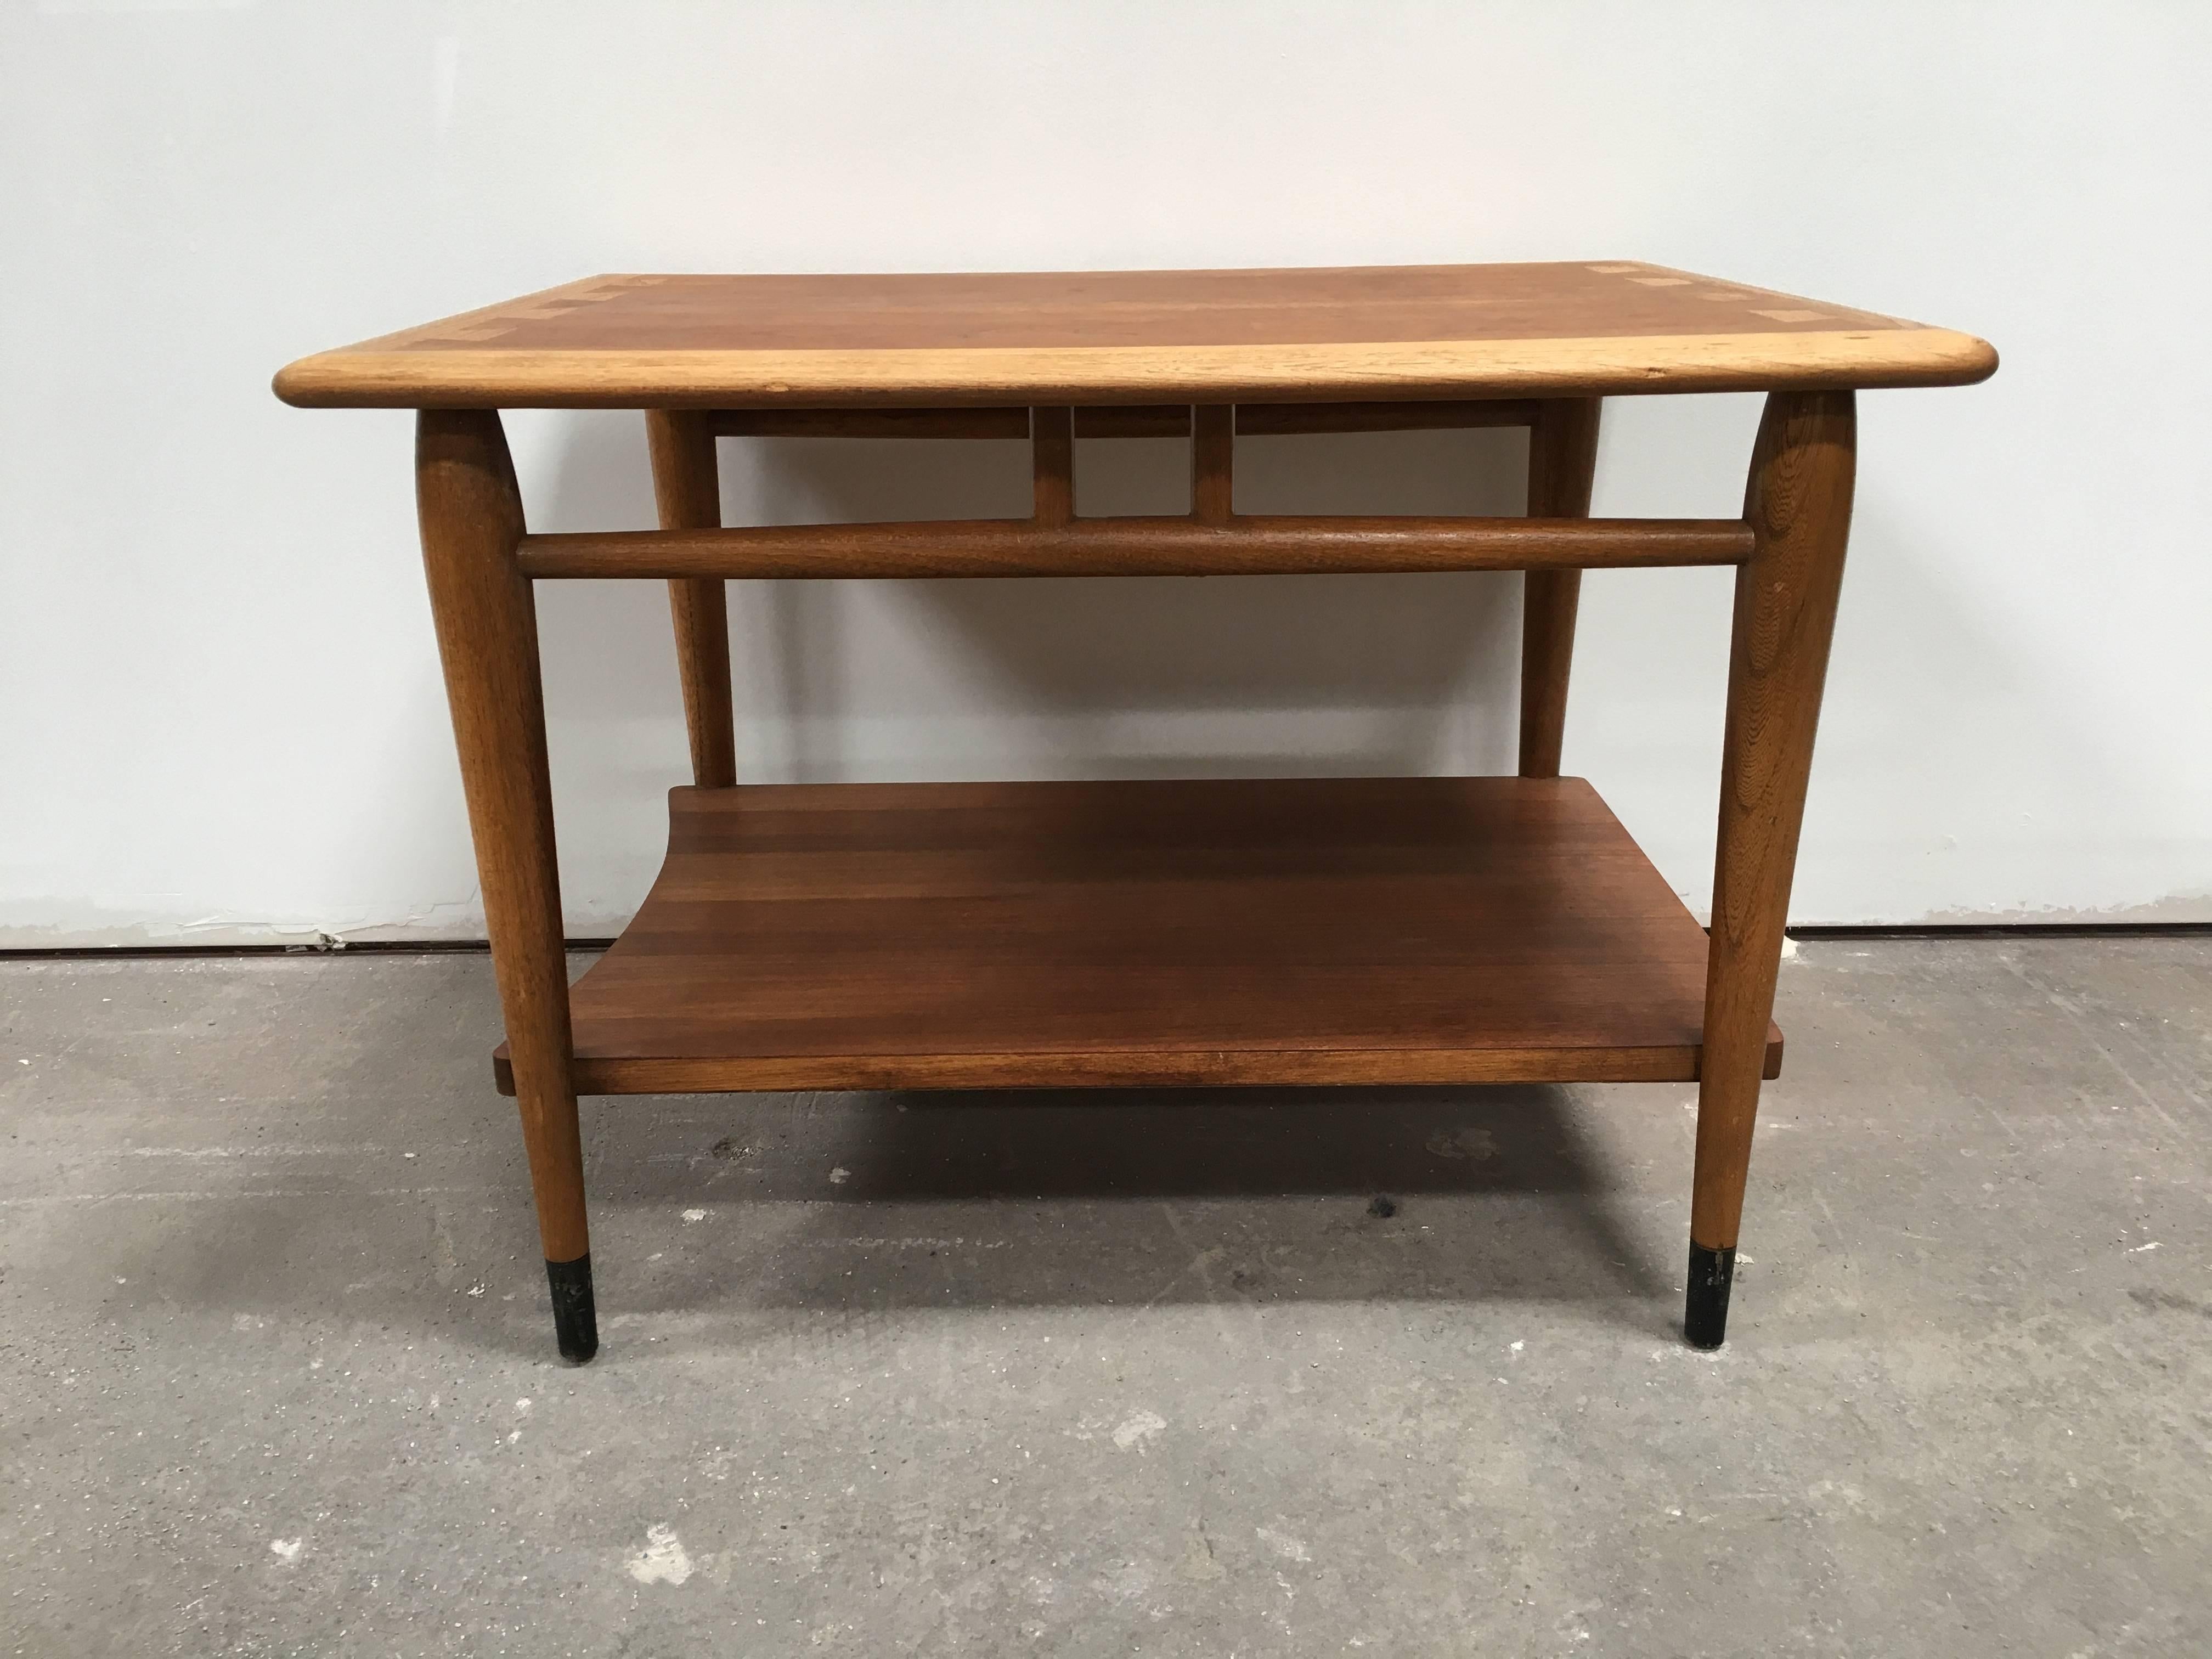 Midcentury Lane Acclaim end table with beautiful dovetailed wooden top and pencil legs.